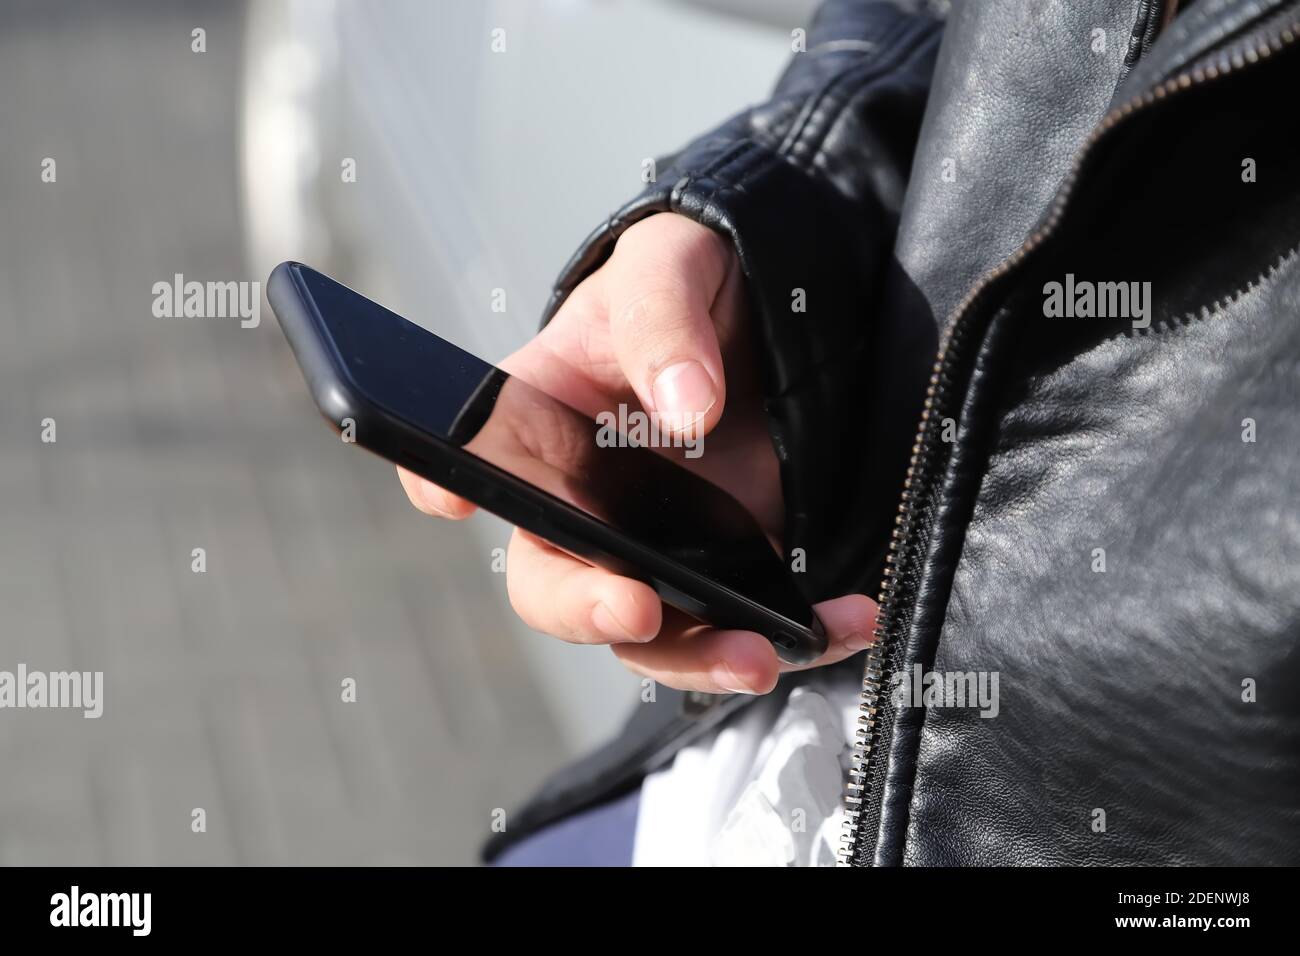 mobile device in a hand Stock Photo